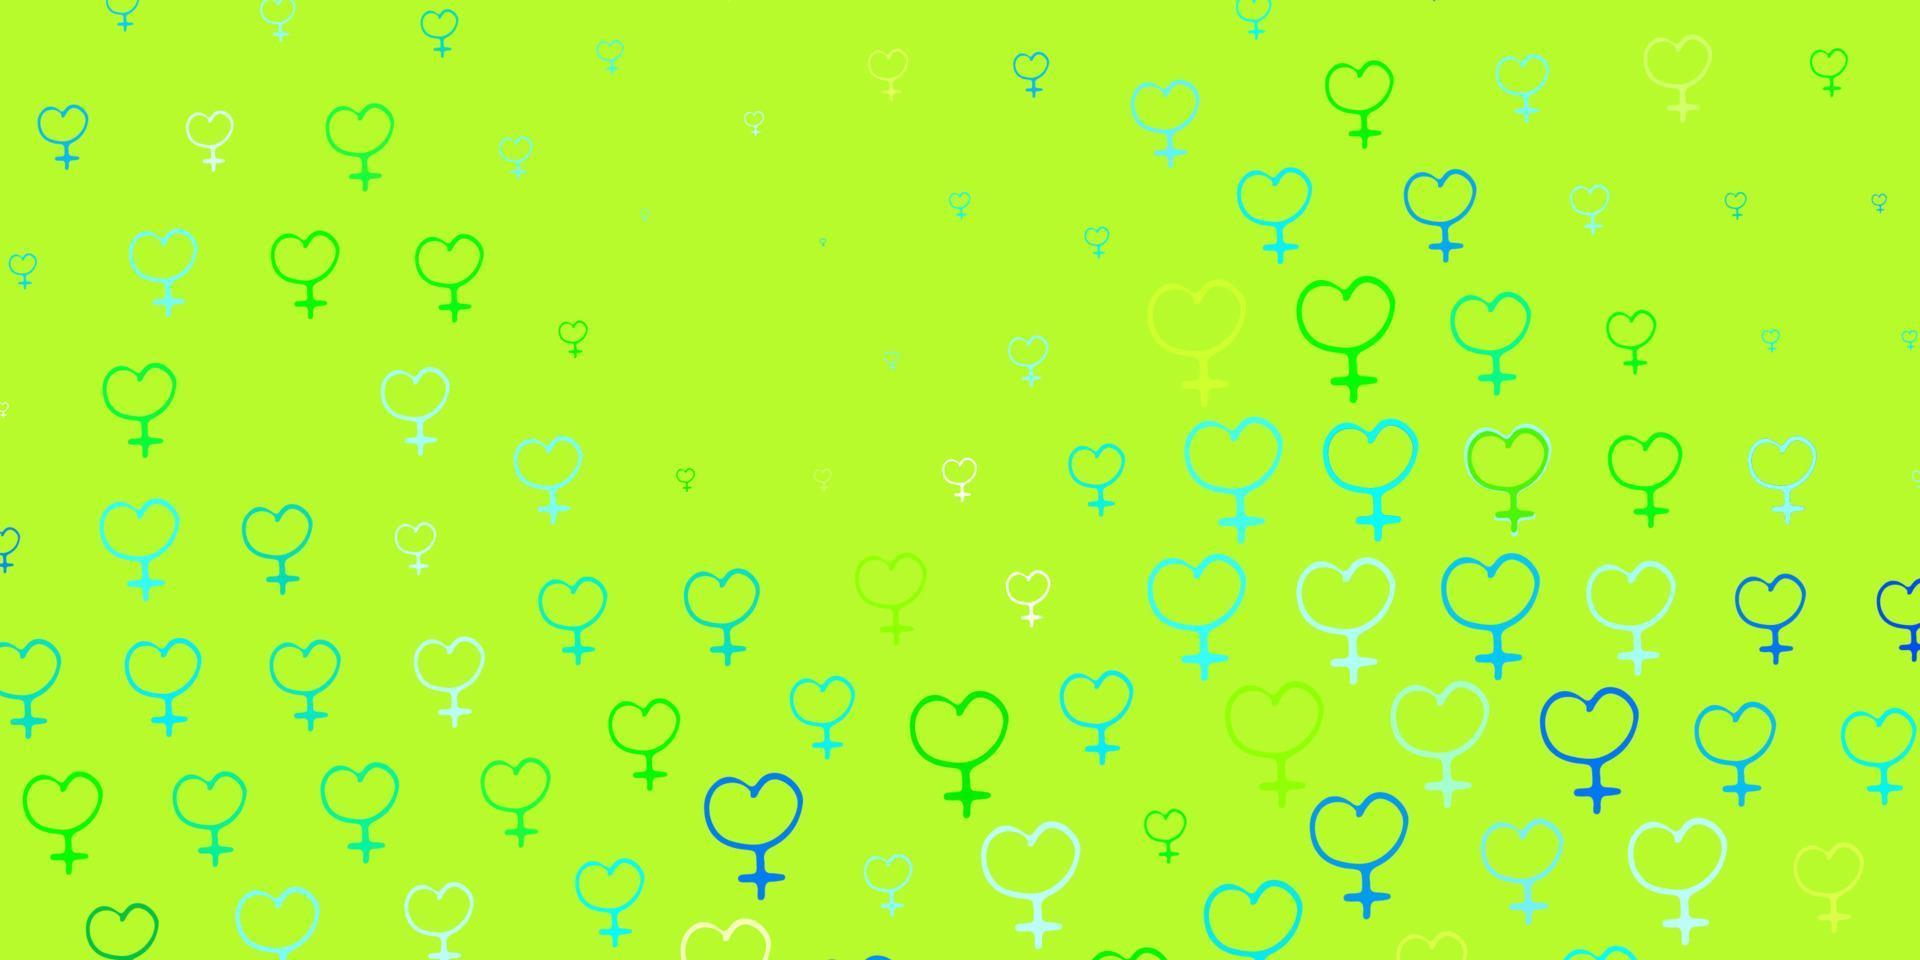 Light Blue, Green vector texture with women rights symbols.